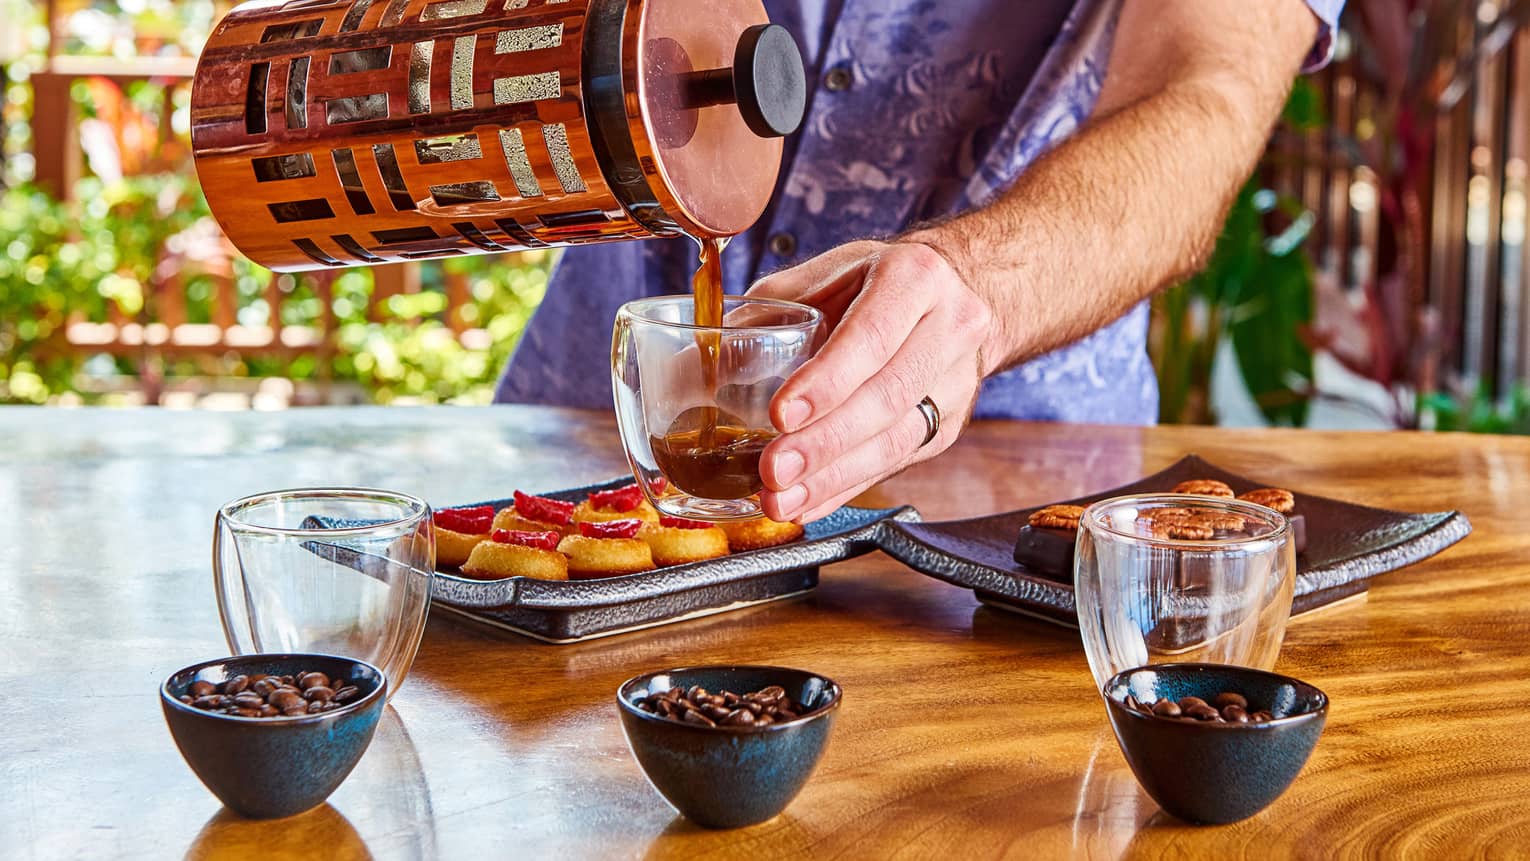 Server pouring coffee from carafe into tasting mugs, desserts on trays, bowls with beans